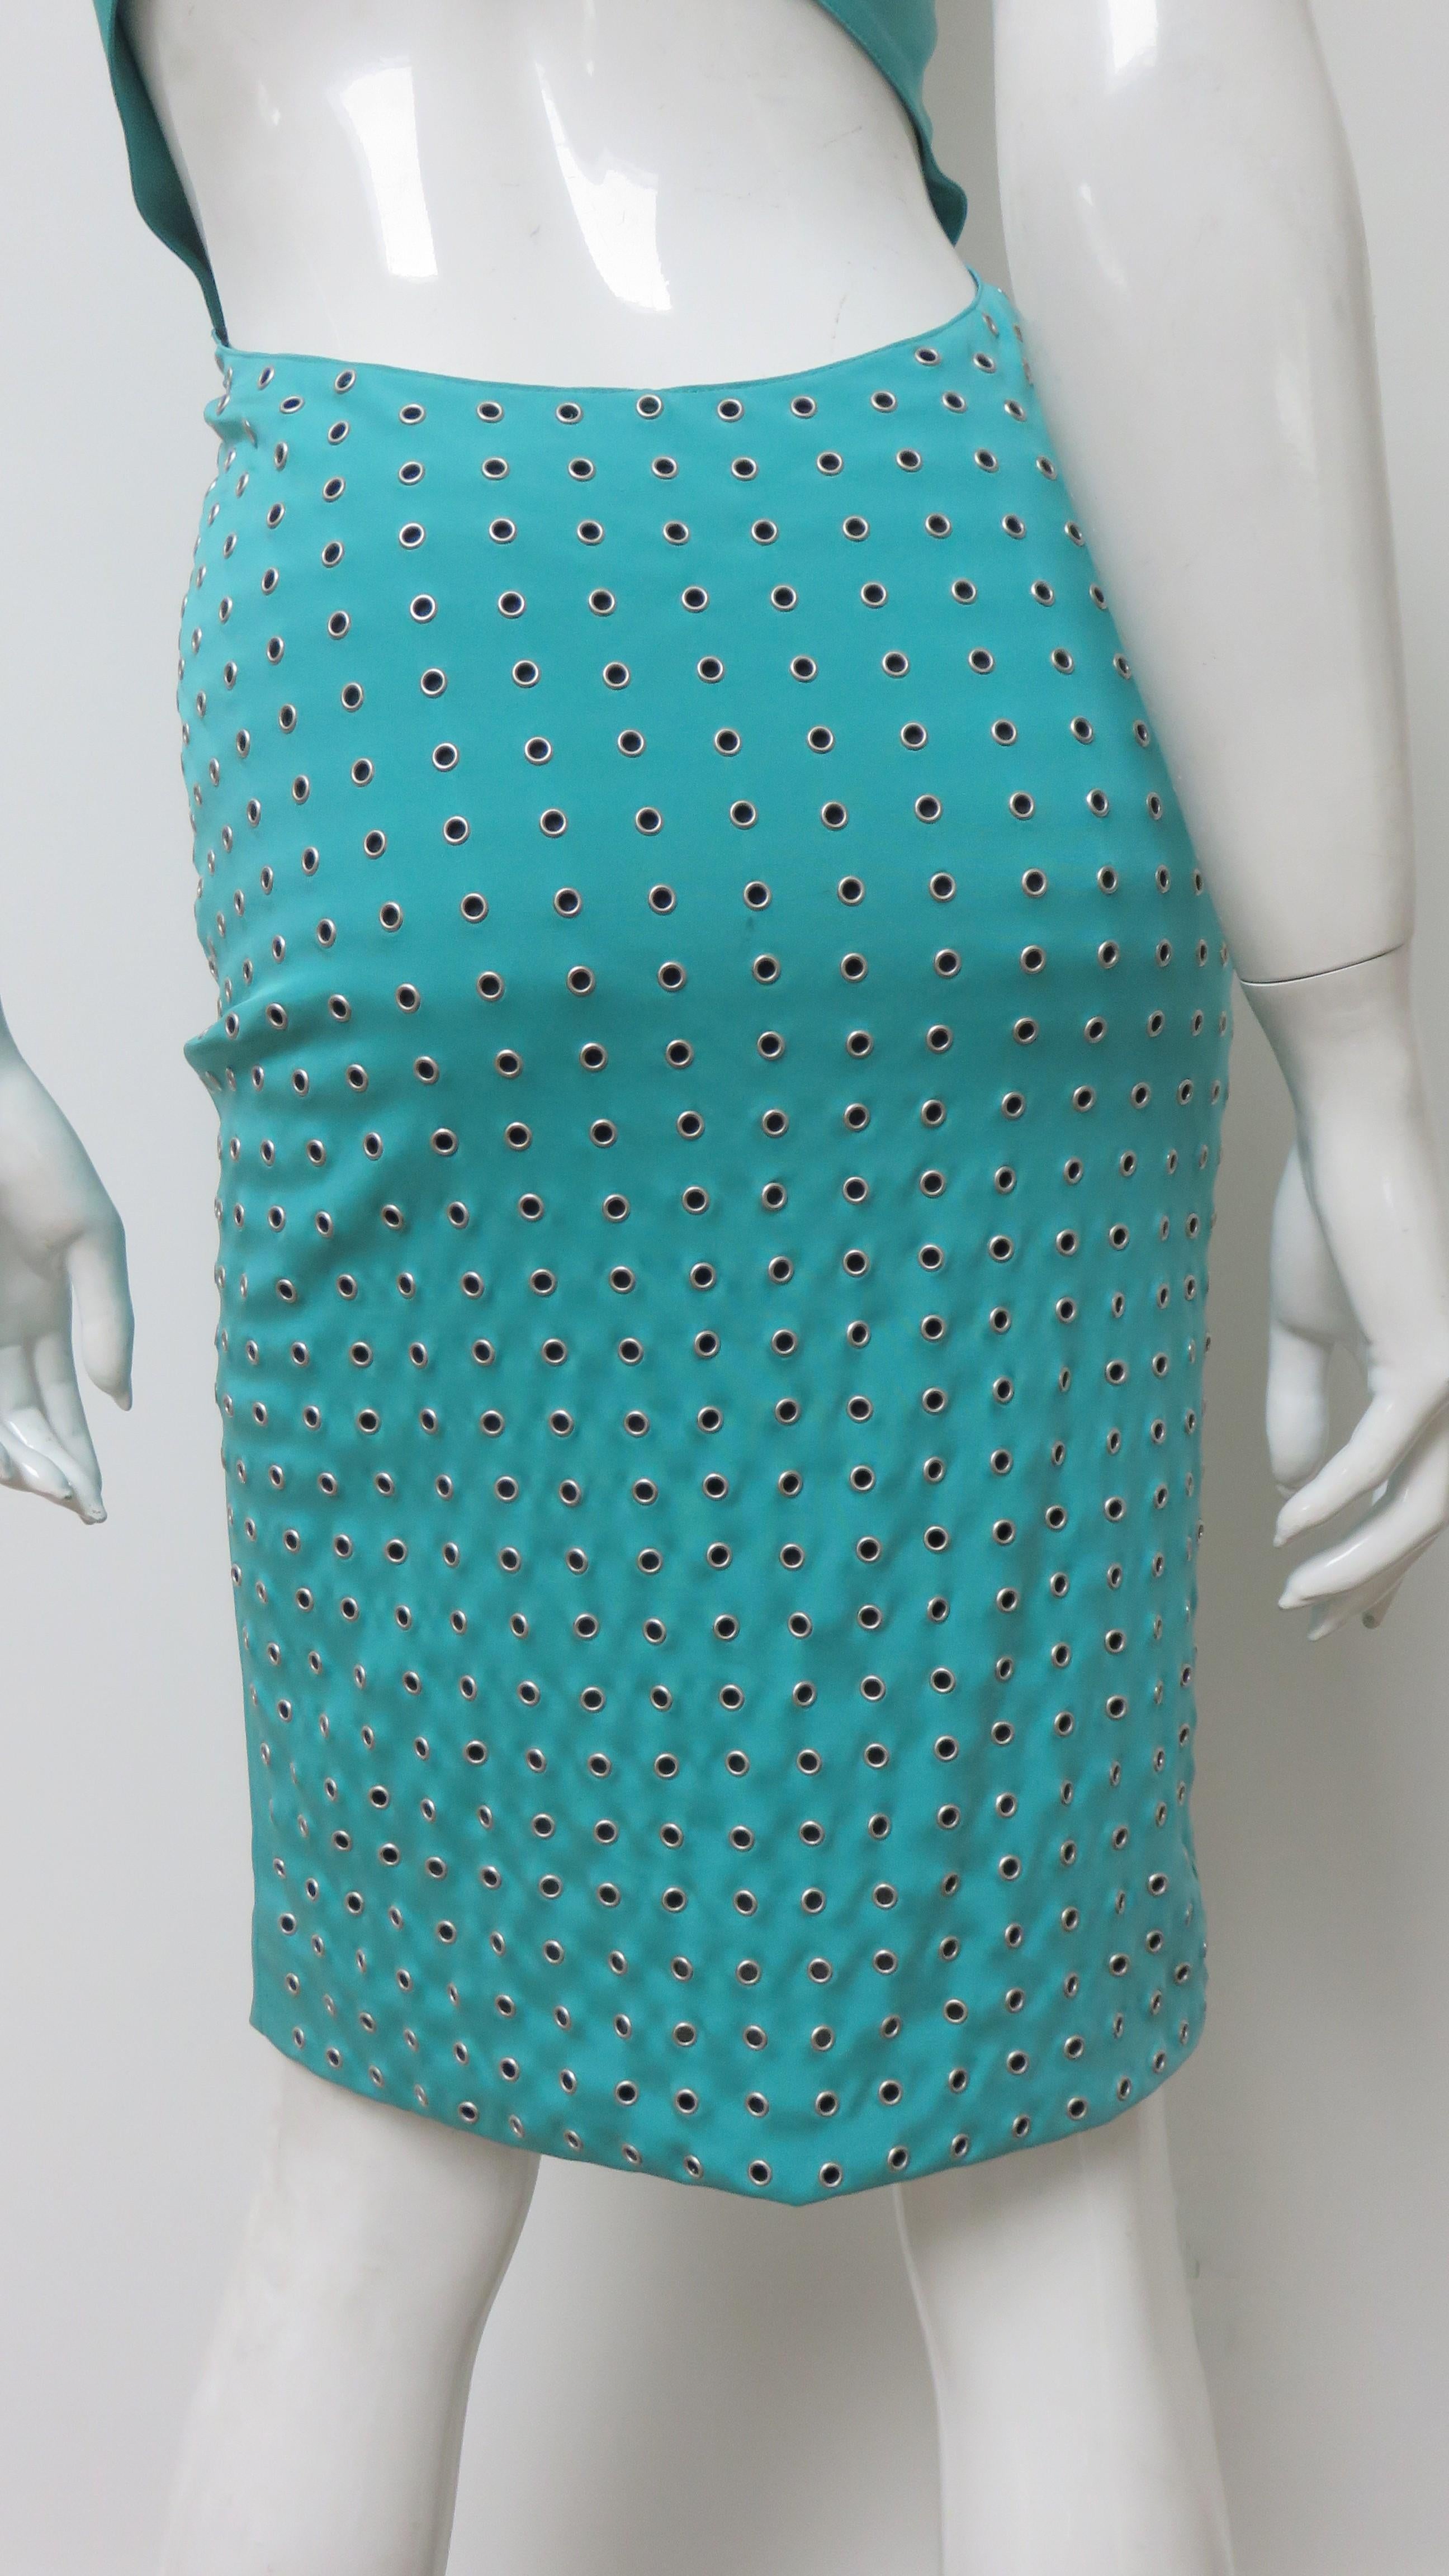 Gianni Versace Cut out Back Silk Dress with Grommets S/S 2003 For Sale 1